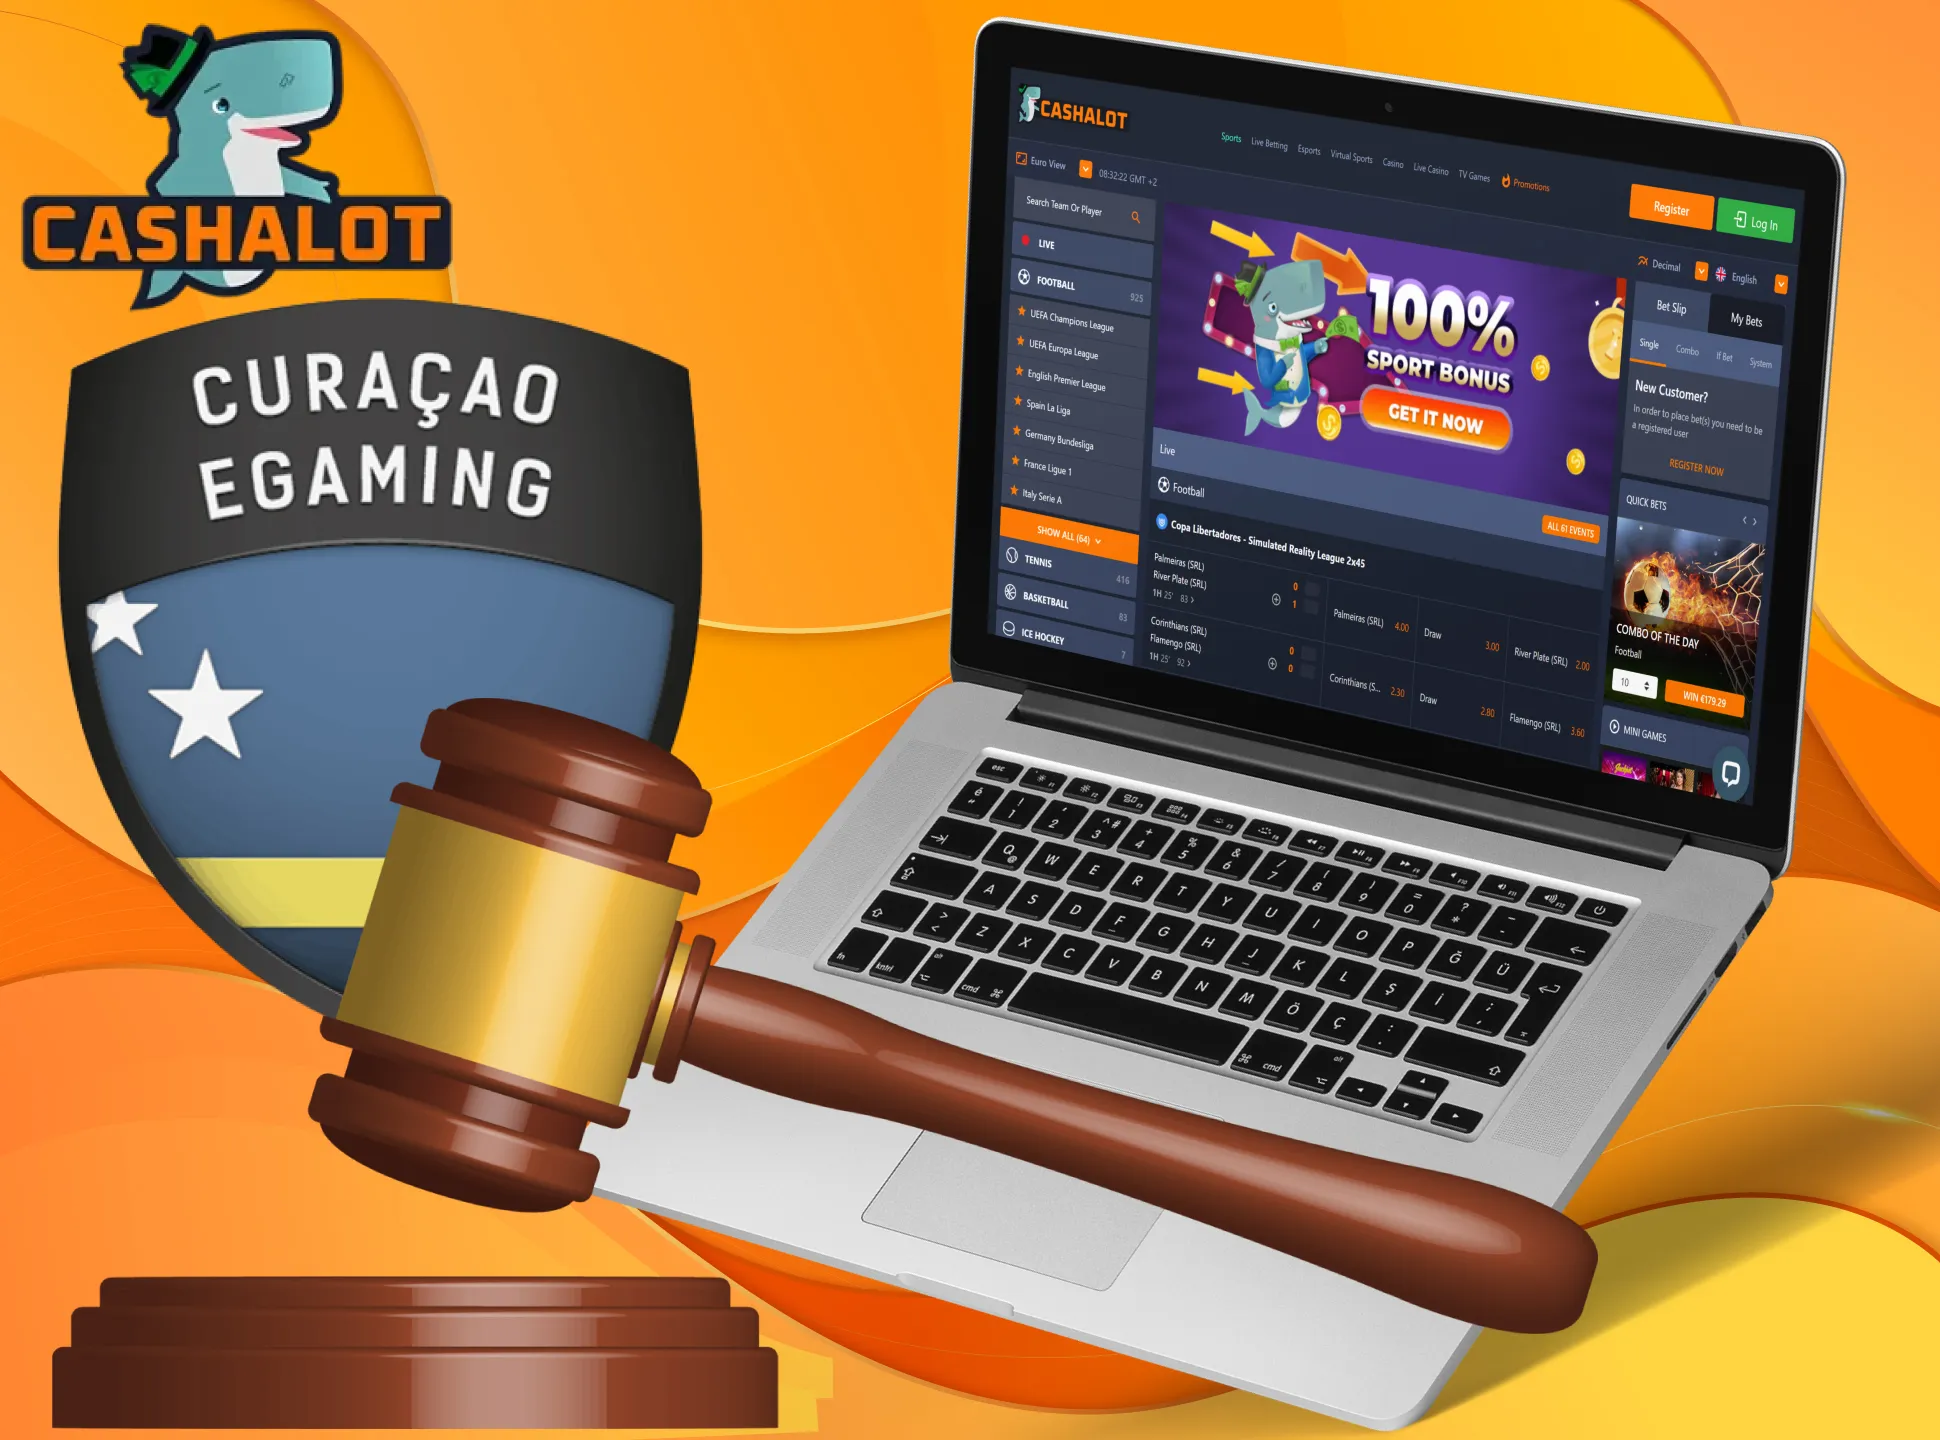 Cashalot is a fully legal betting company in India.